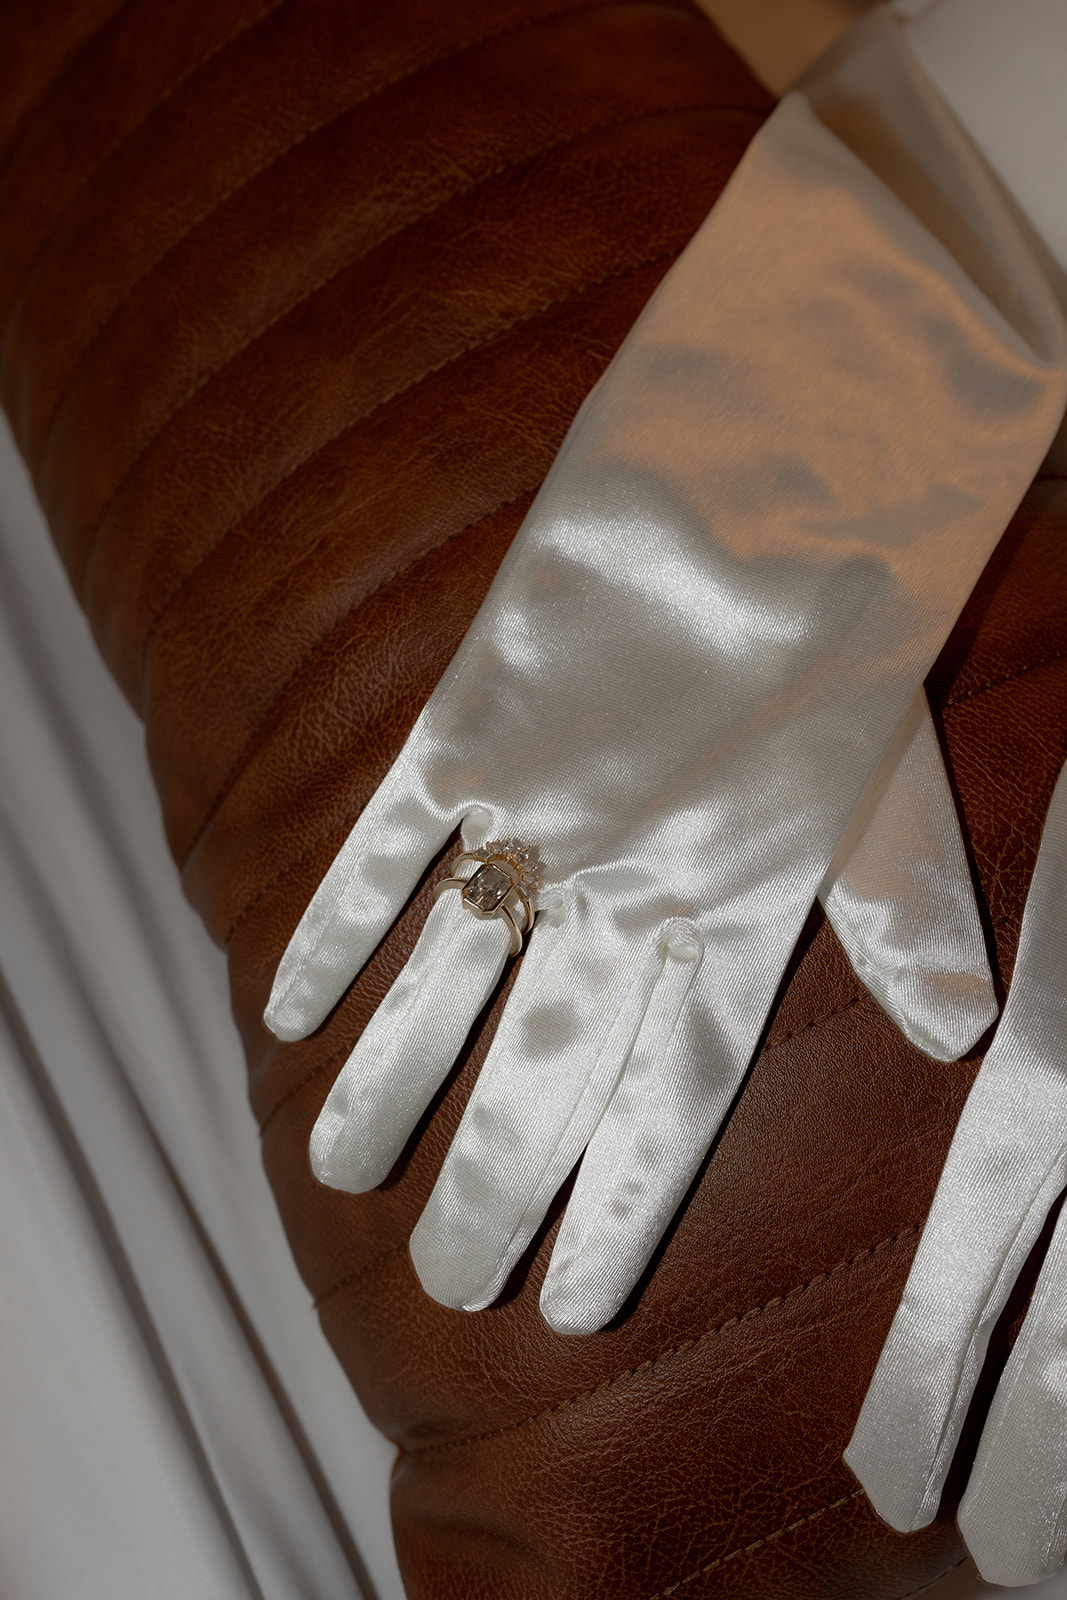 White gloves with ring on brown leather couch